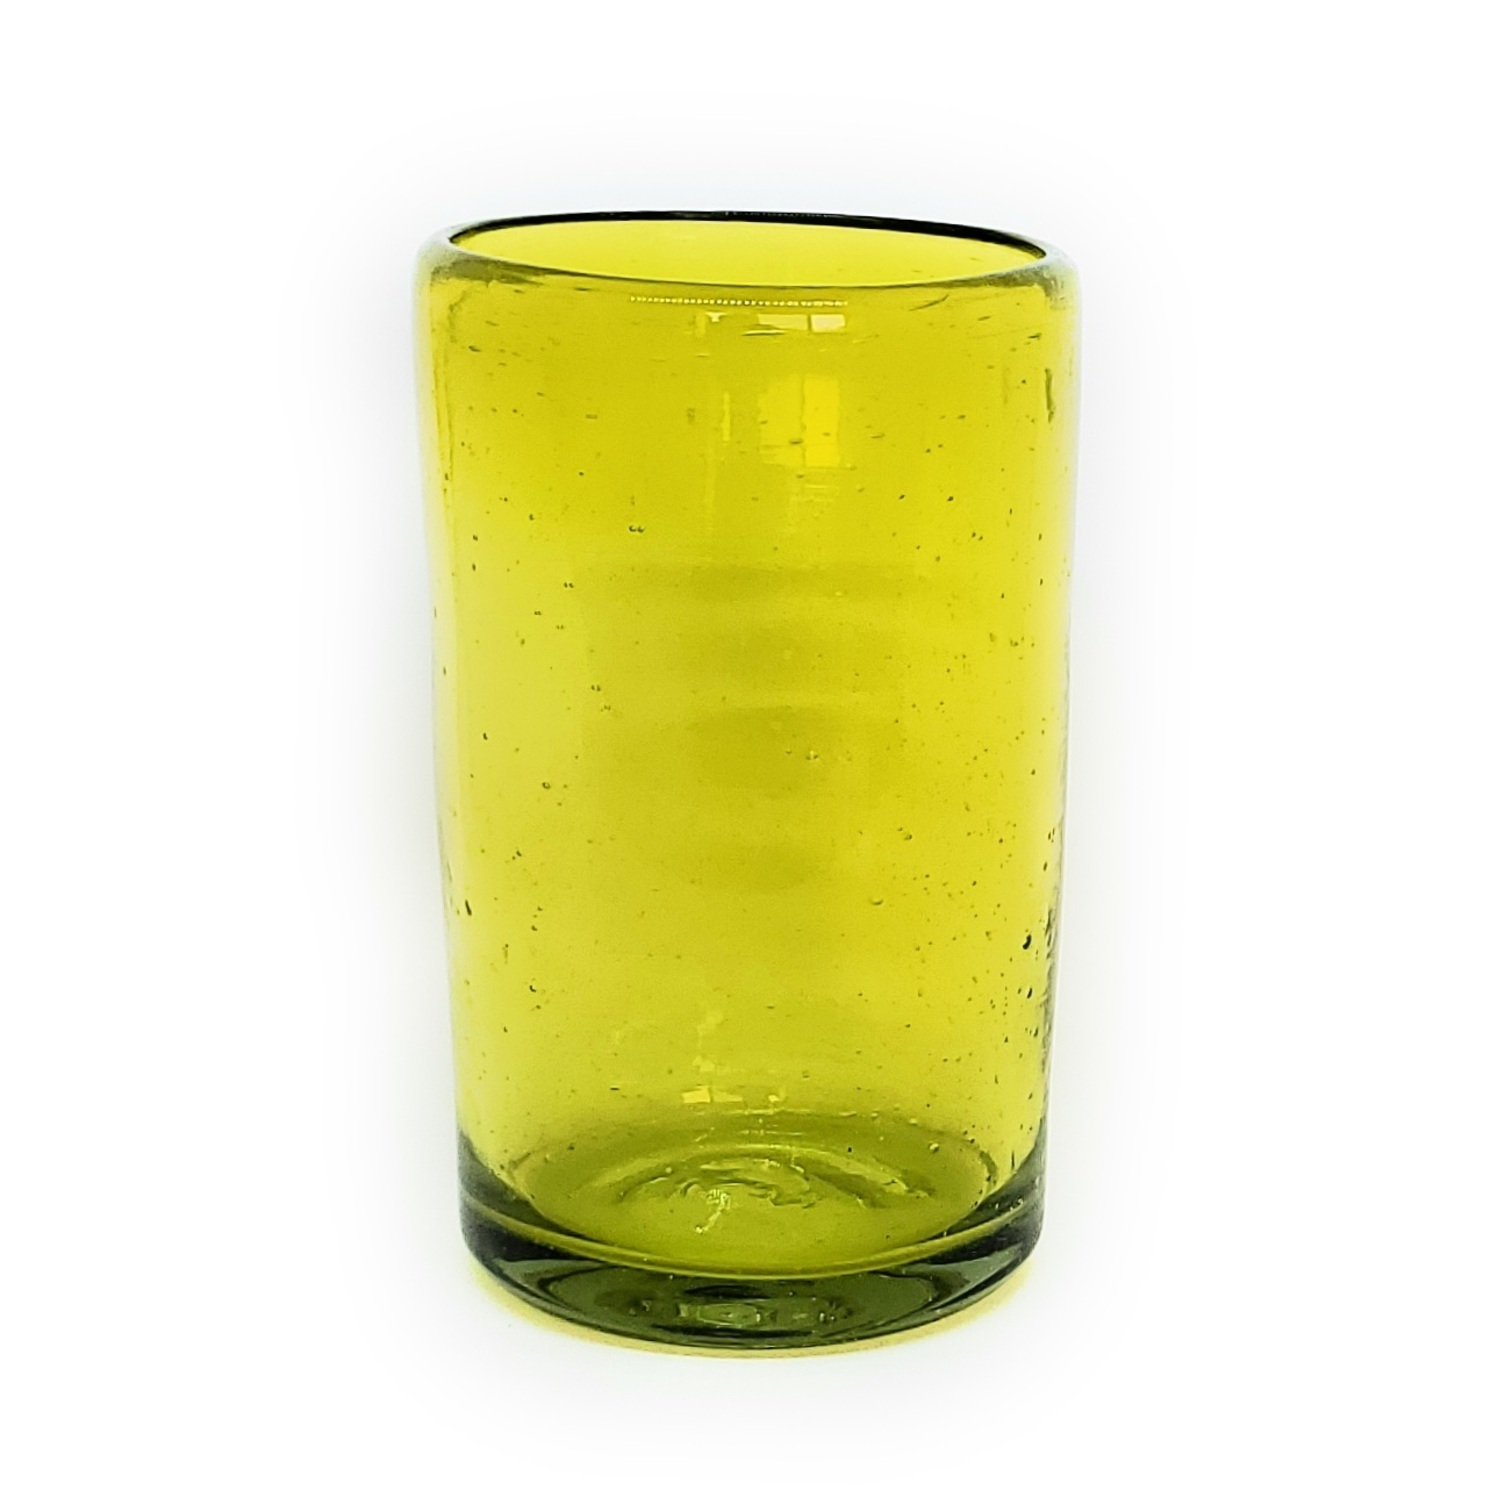 Solid Yellow 14 oz Drinking Glasses 